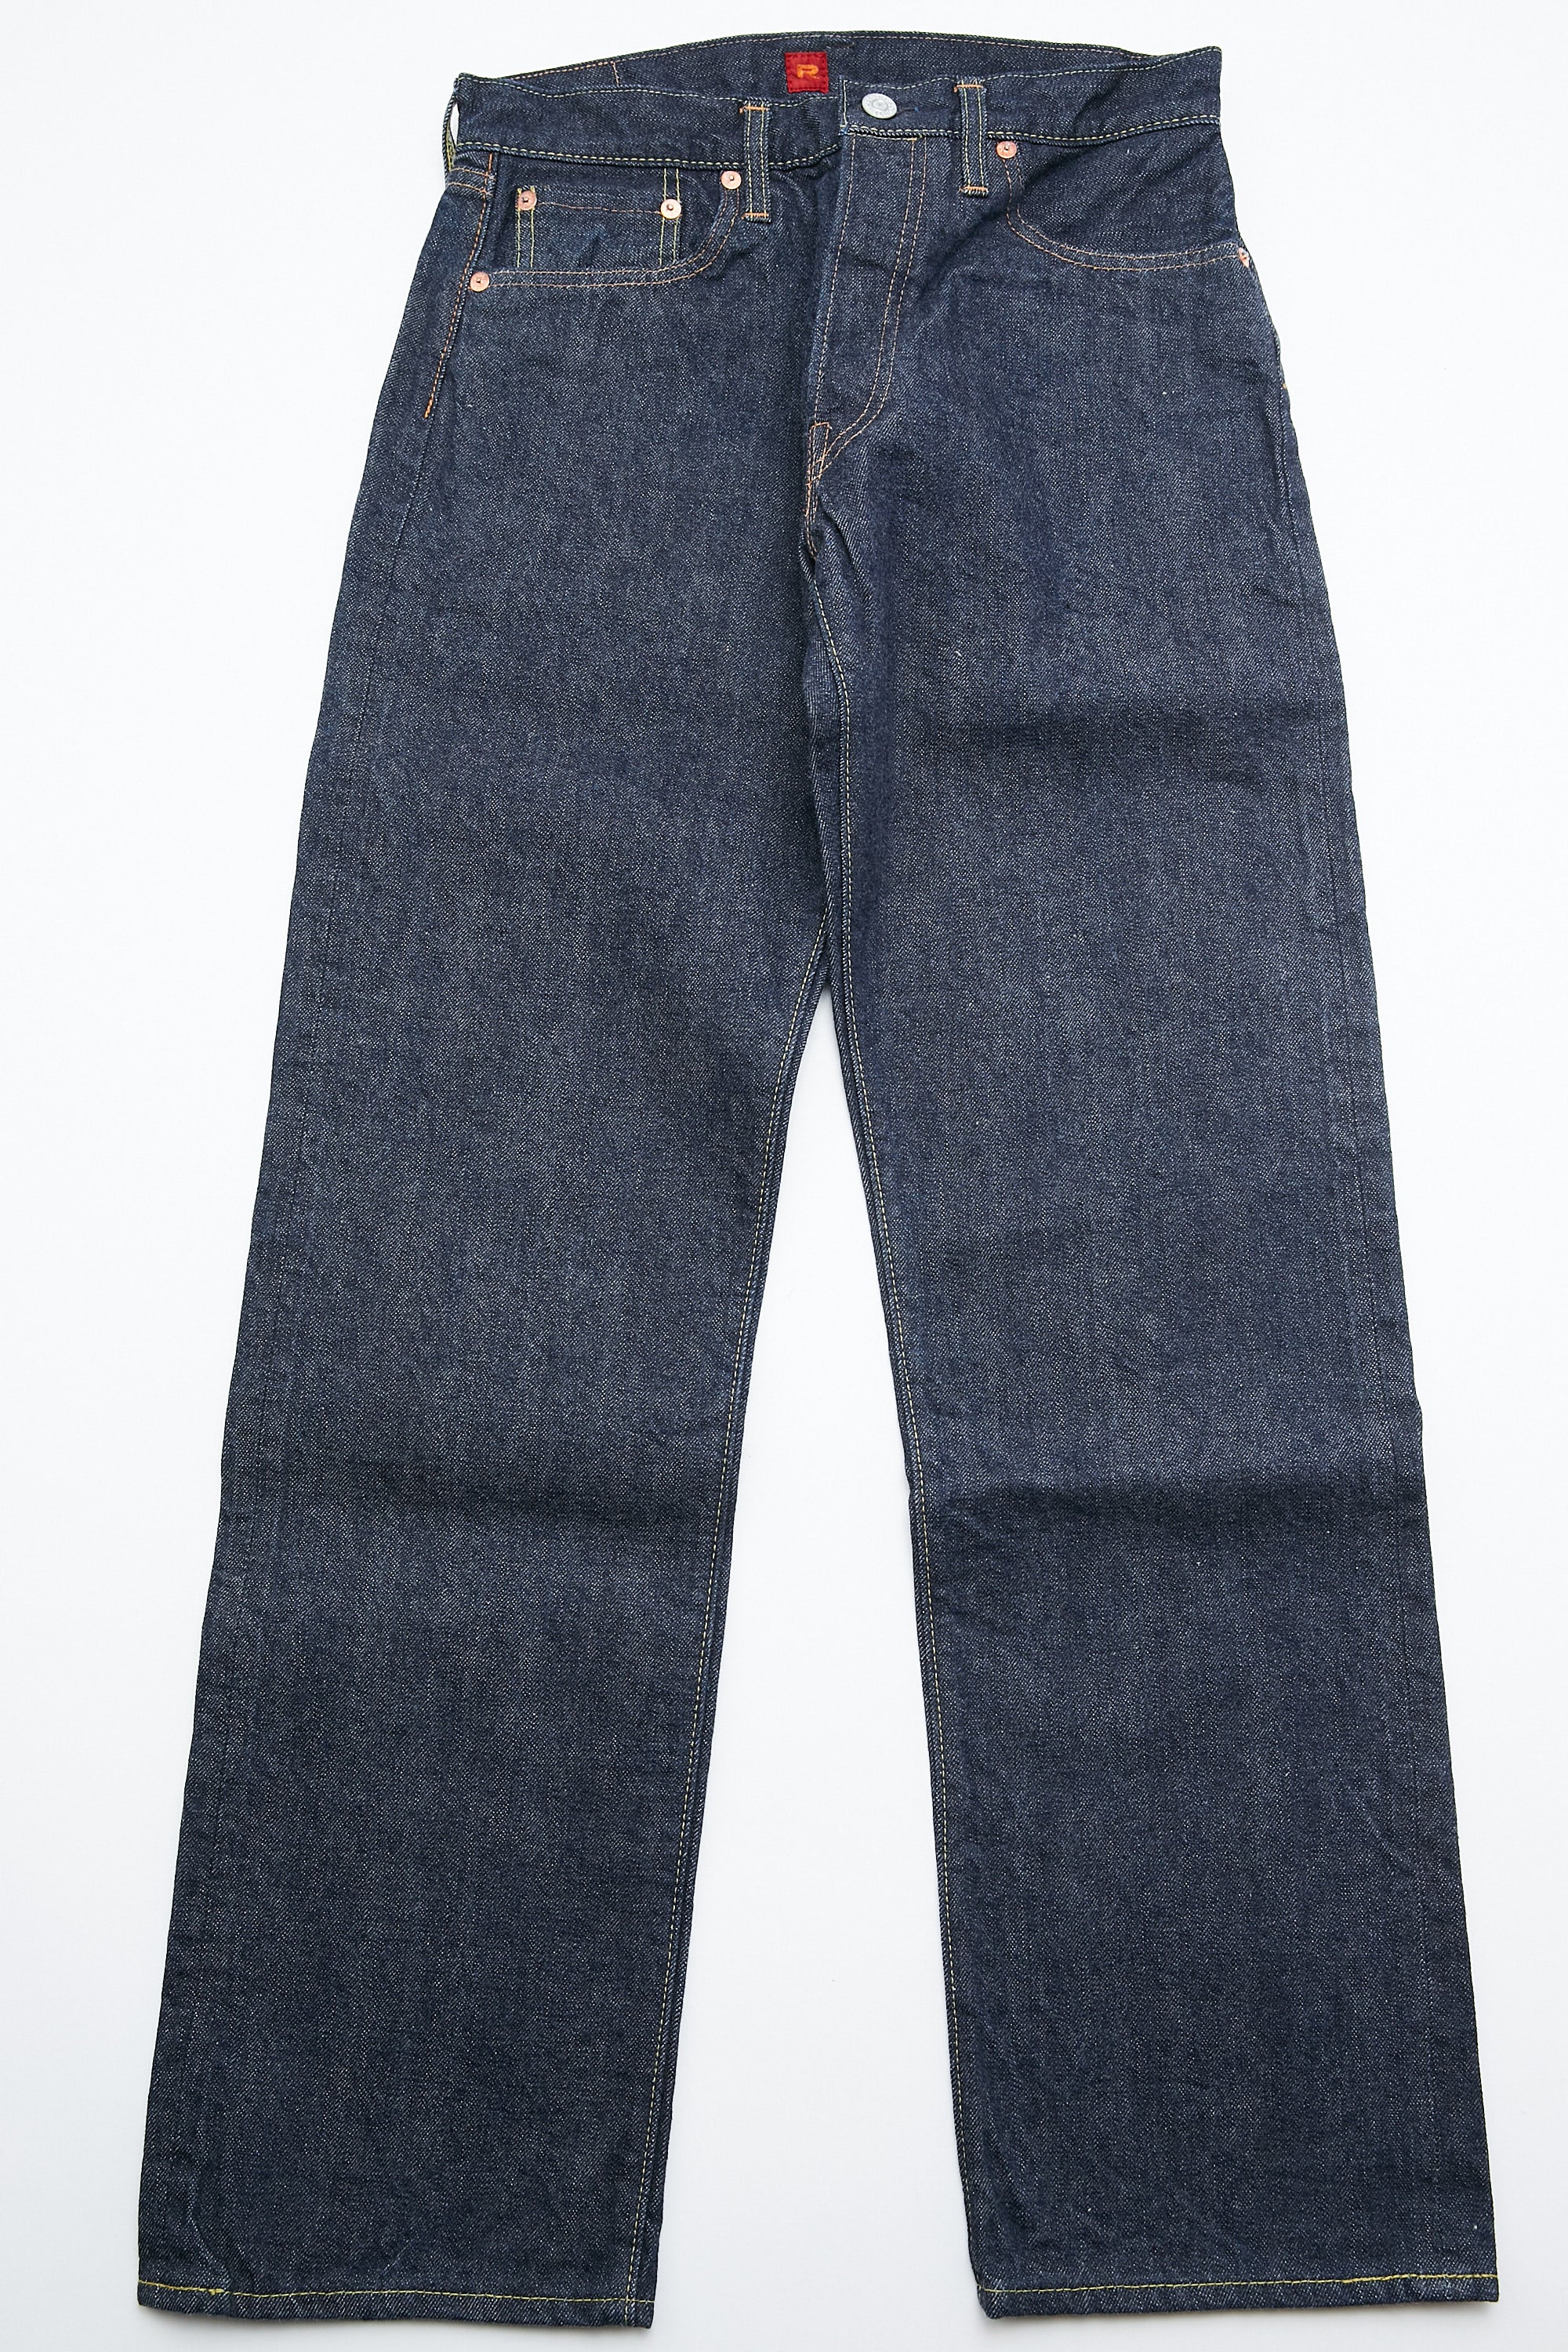 Resolute Straight Fit One Wash Denim Totem Brand Co.